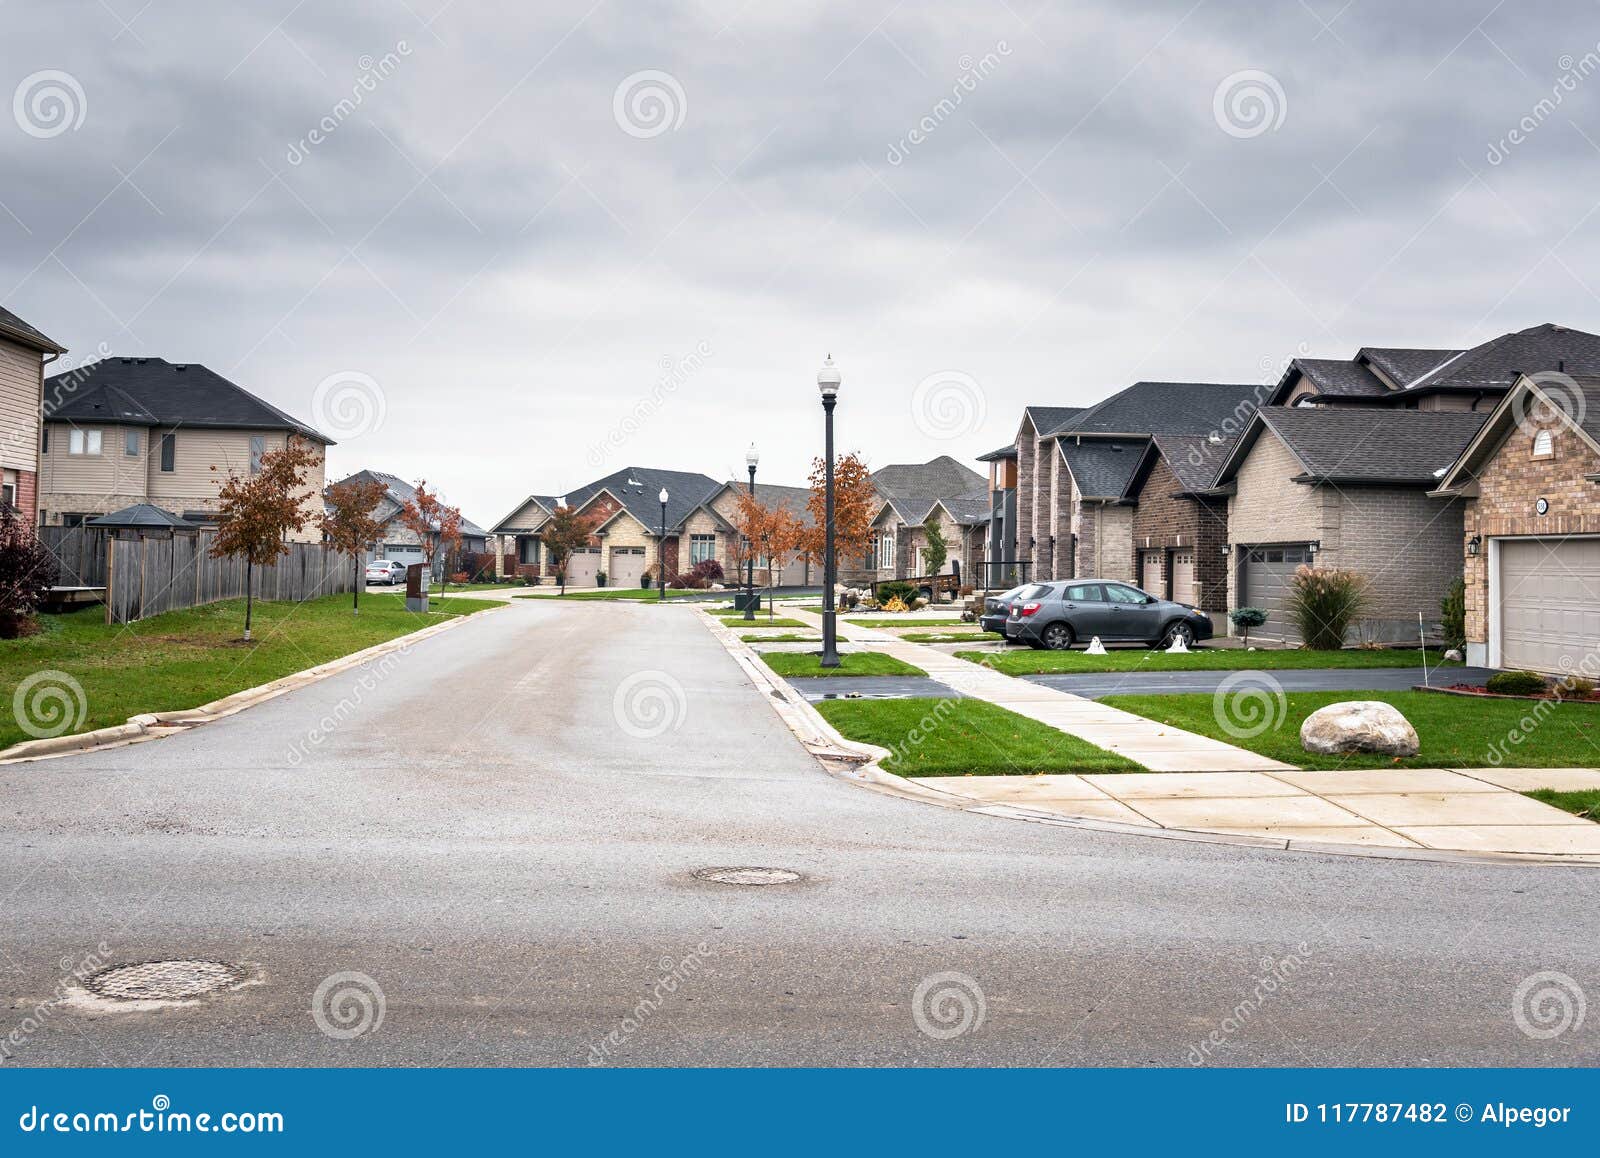 new houses along a street in a residential district